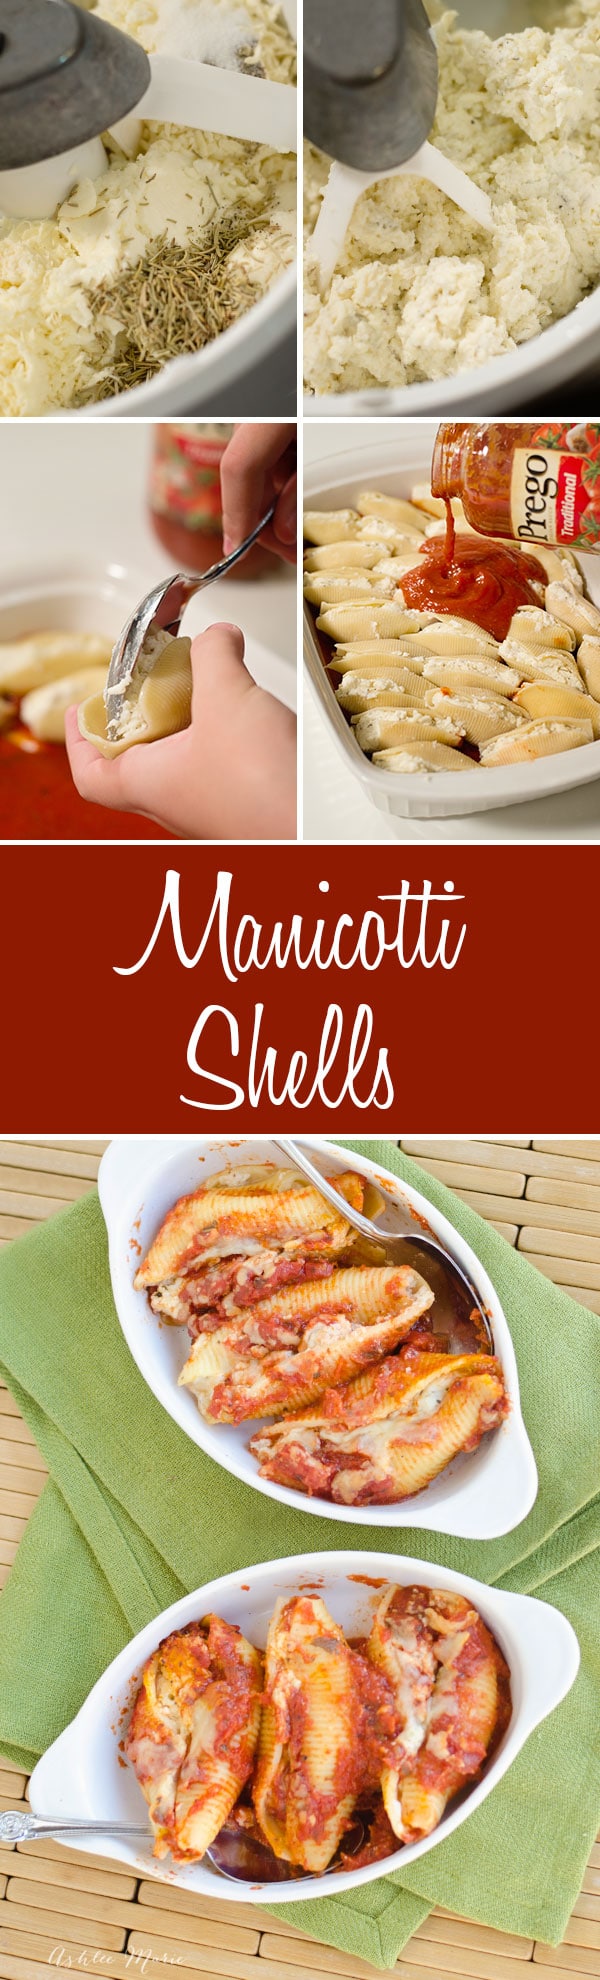 this manicotti in shells dinner is fast and easy and one that everyone in the family loves. Perfect for a busy night